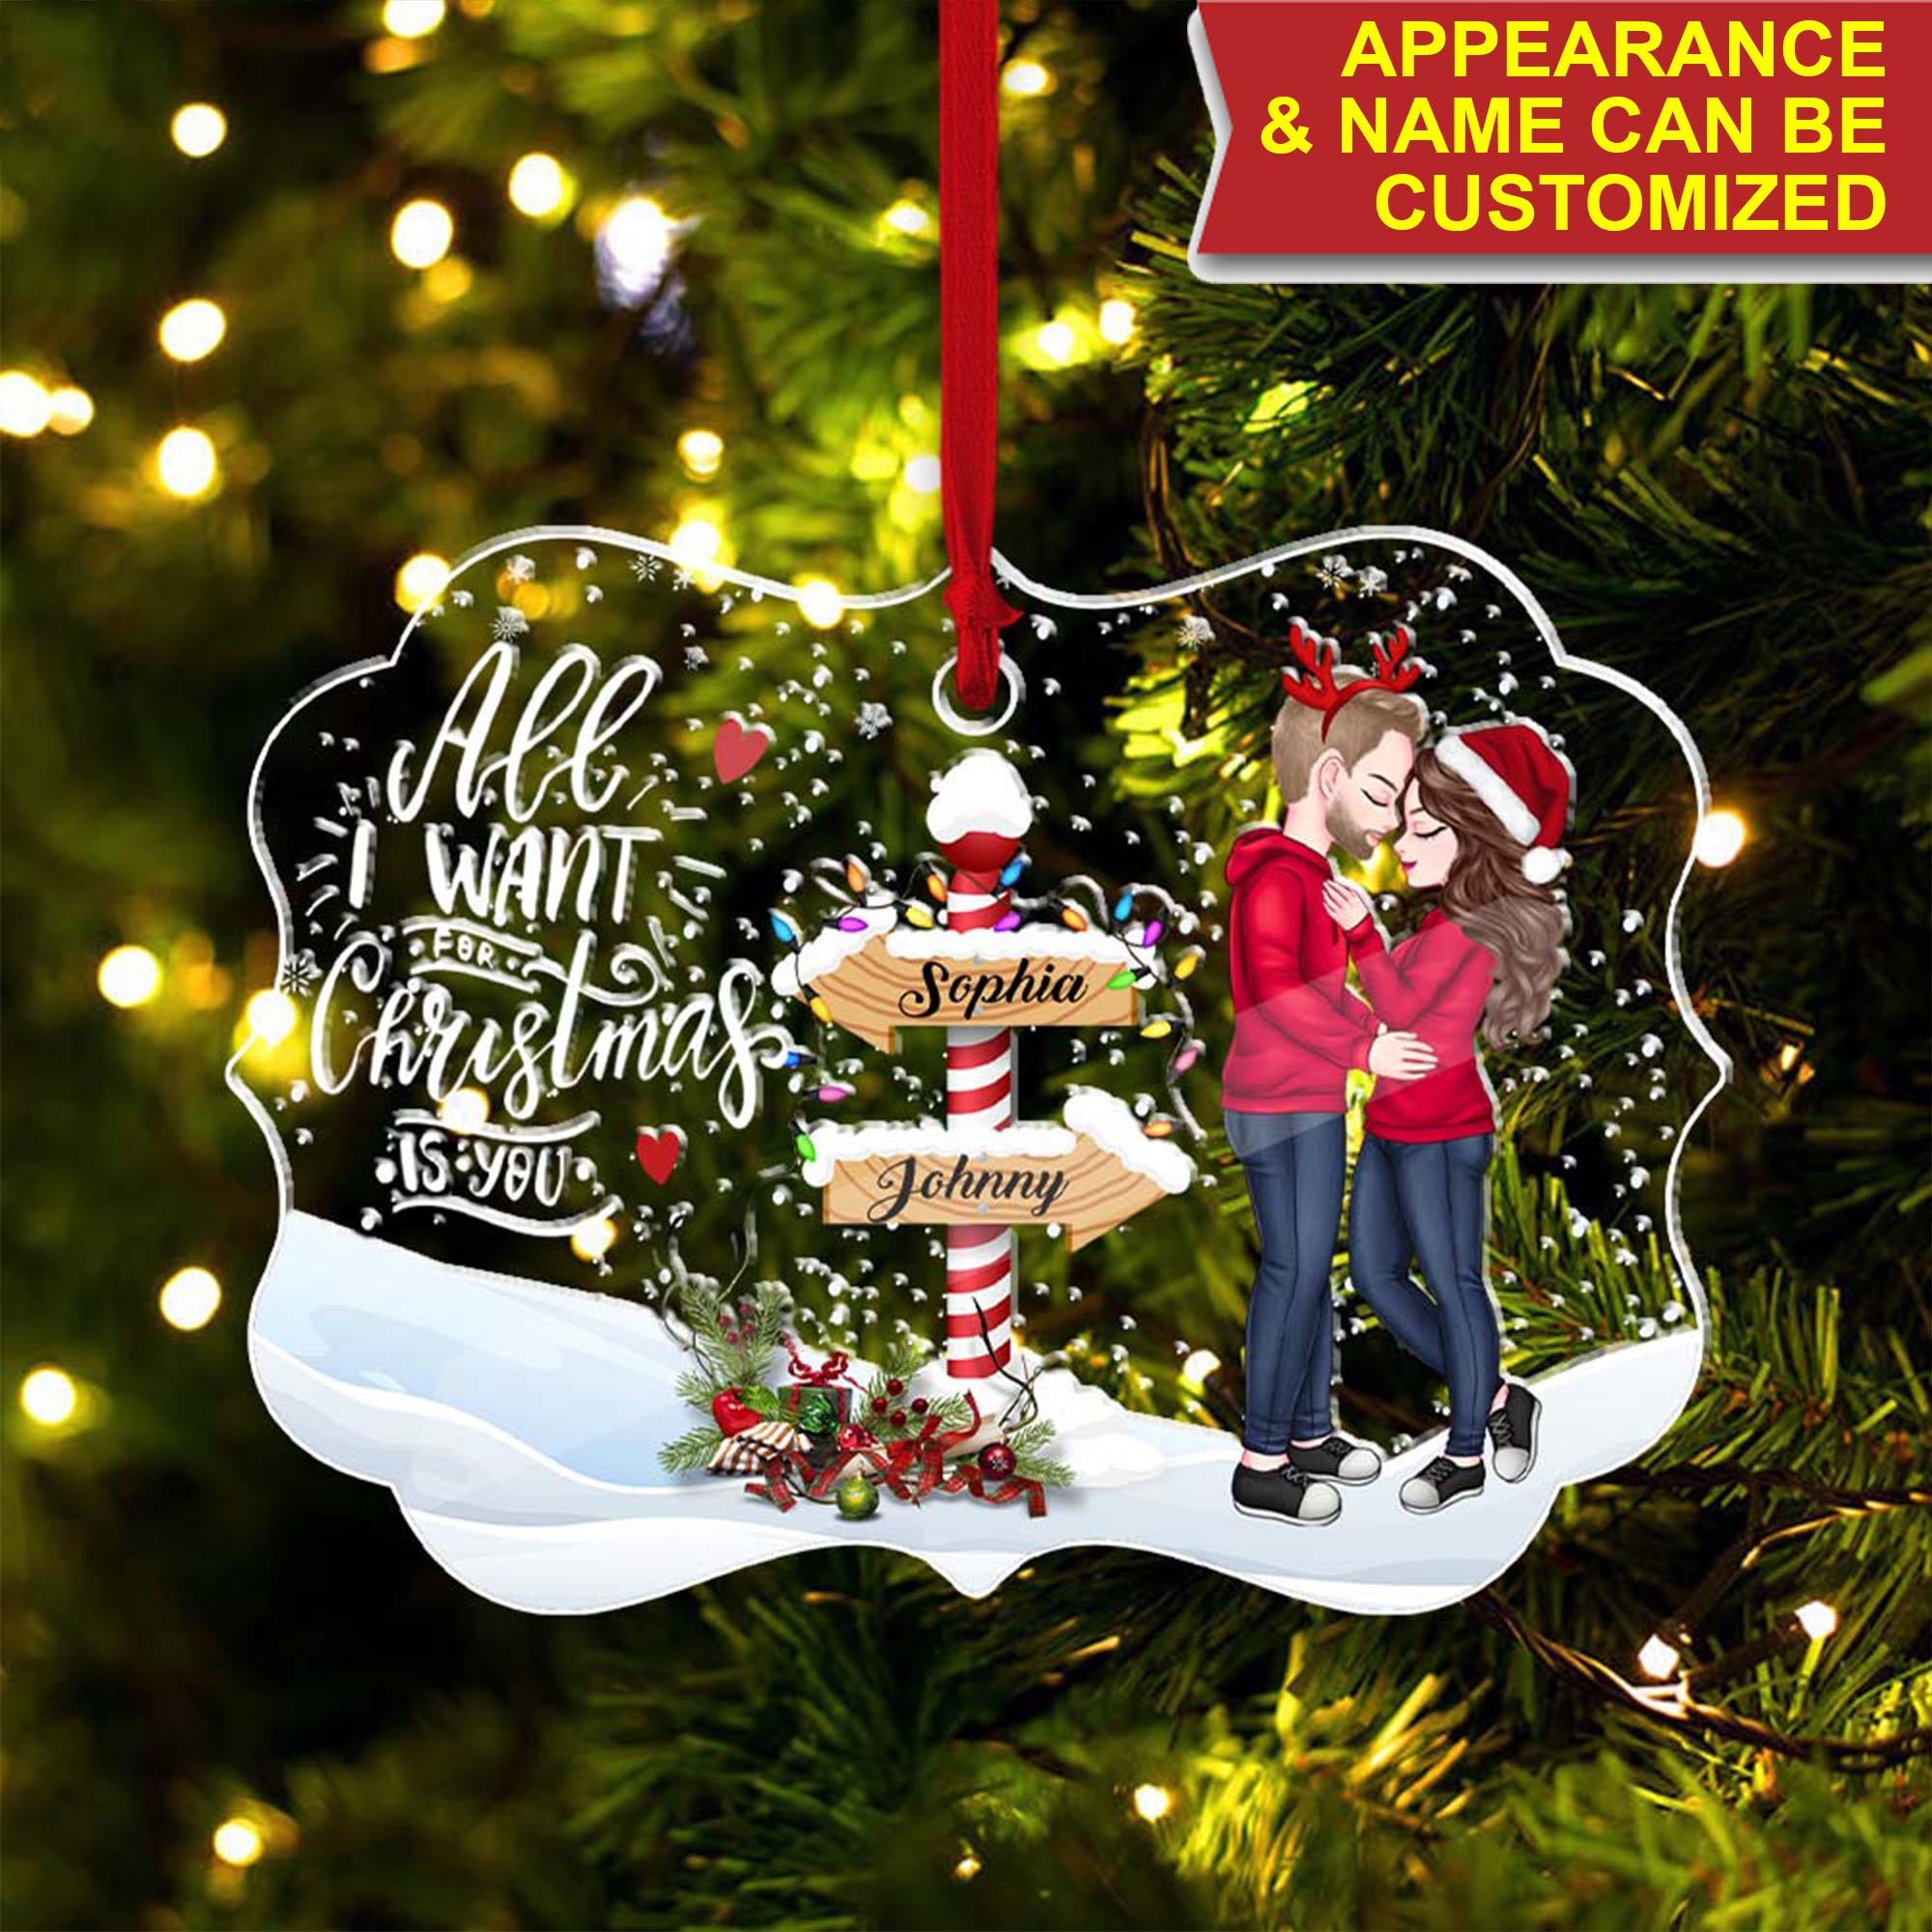 All I Want For Christmas Is You Couple Ornament - Custom Appearance, Personalized Acrylic Ornament - Gift For Christmas, Couple Gift, Family Gift